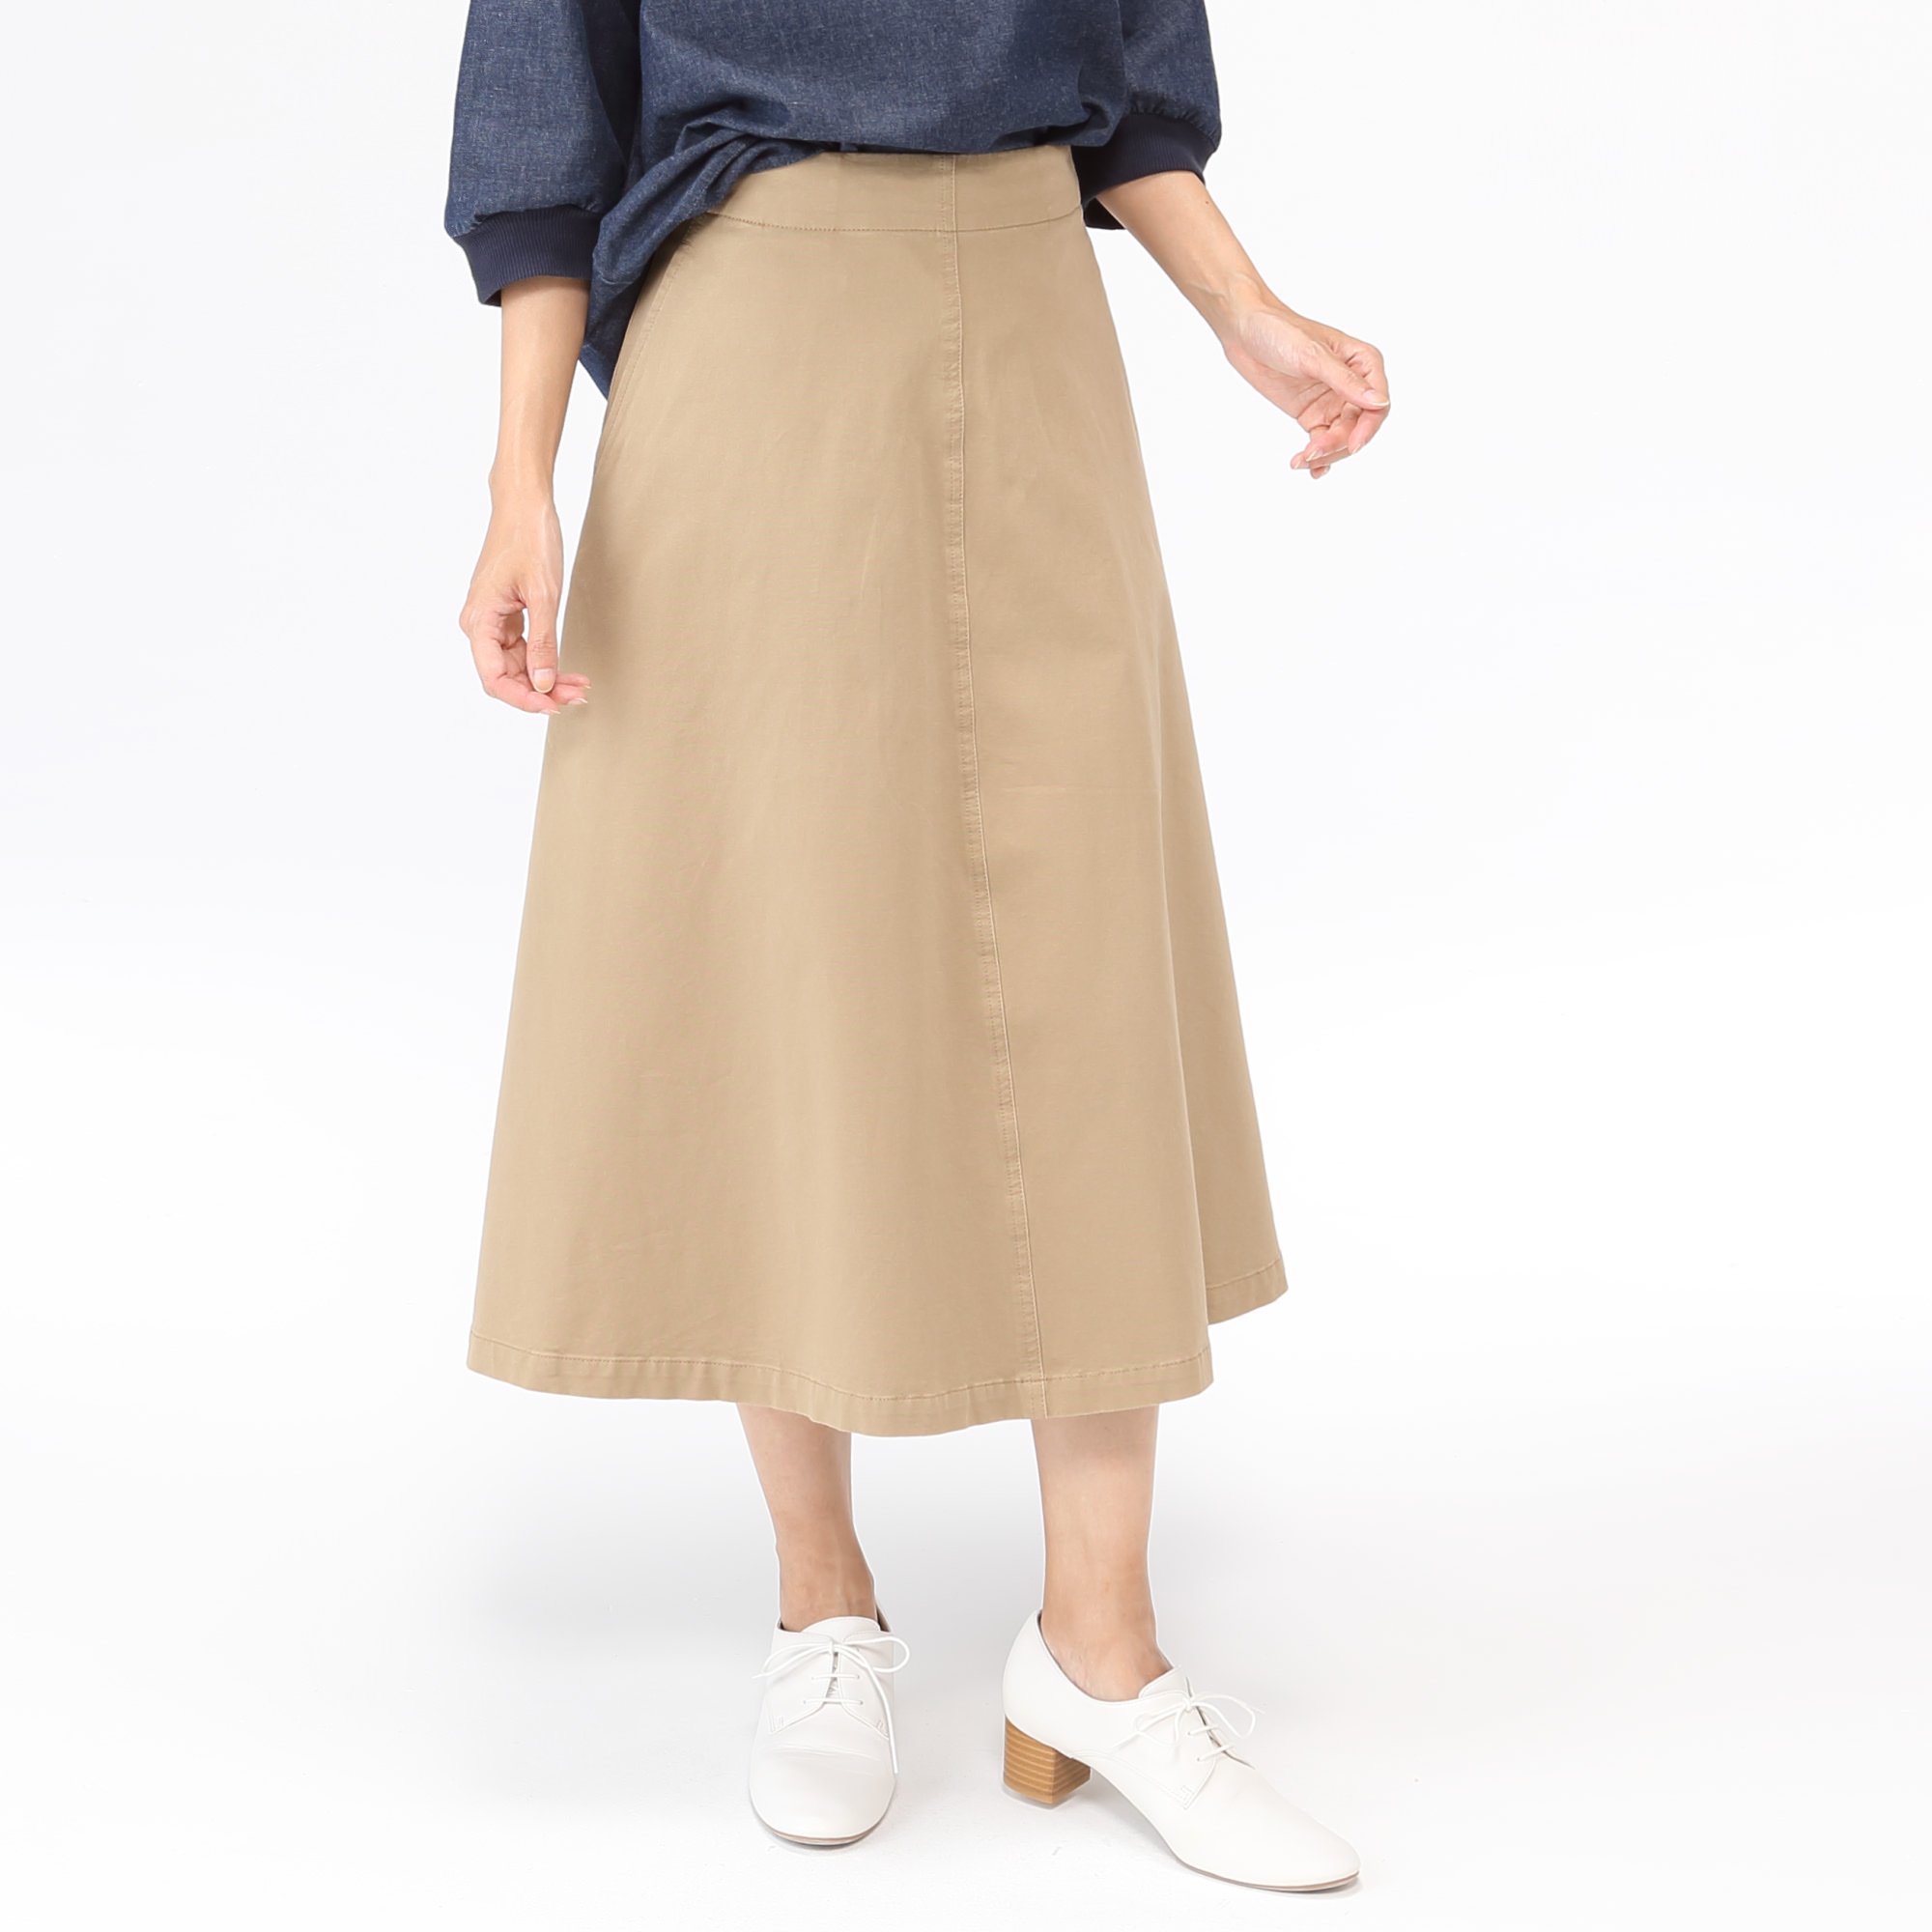 MUJI USA on Twitter: "The organic cotton chino fabric stretches  horizontally and vertically for a more comfortable fit. Get 20% off of  men's and women's Chino Series in stores and online until